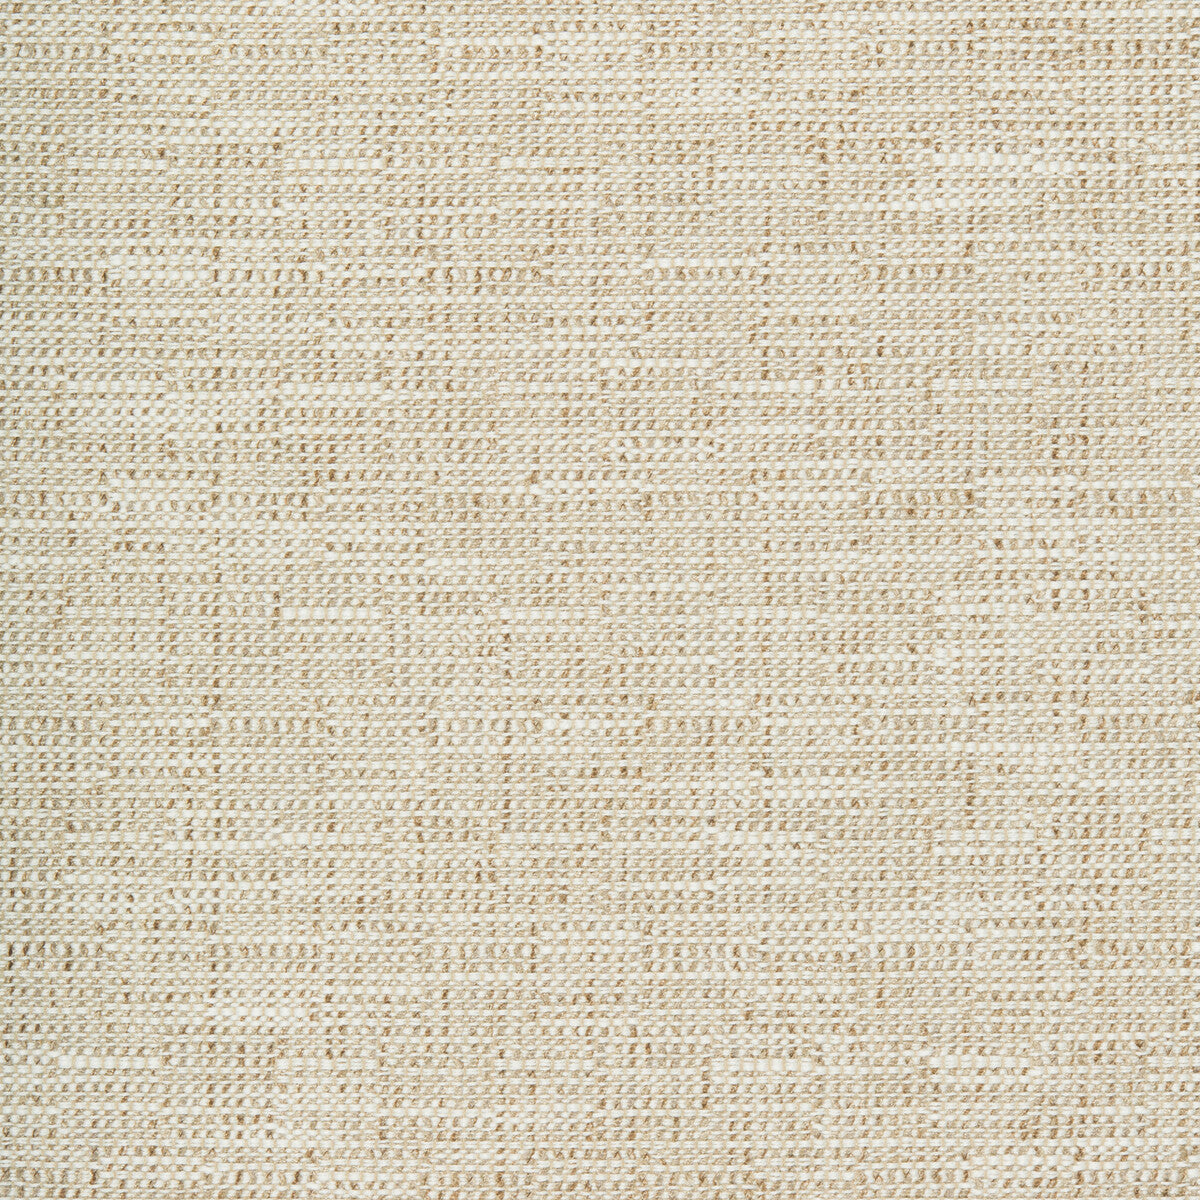 Kravet Smart fabric in 35518-106 color - pattern 35518.106.0 - by Kravet Smart in the Inside Out Performance Fabrics collection